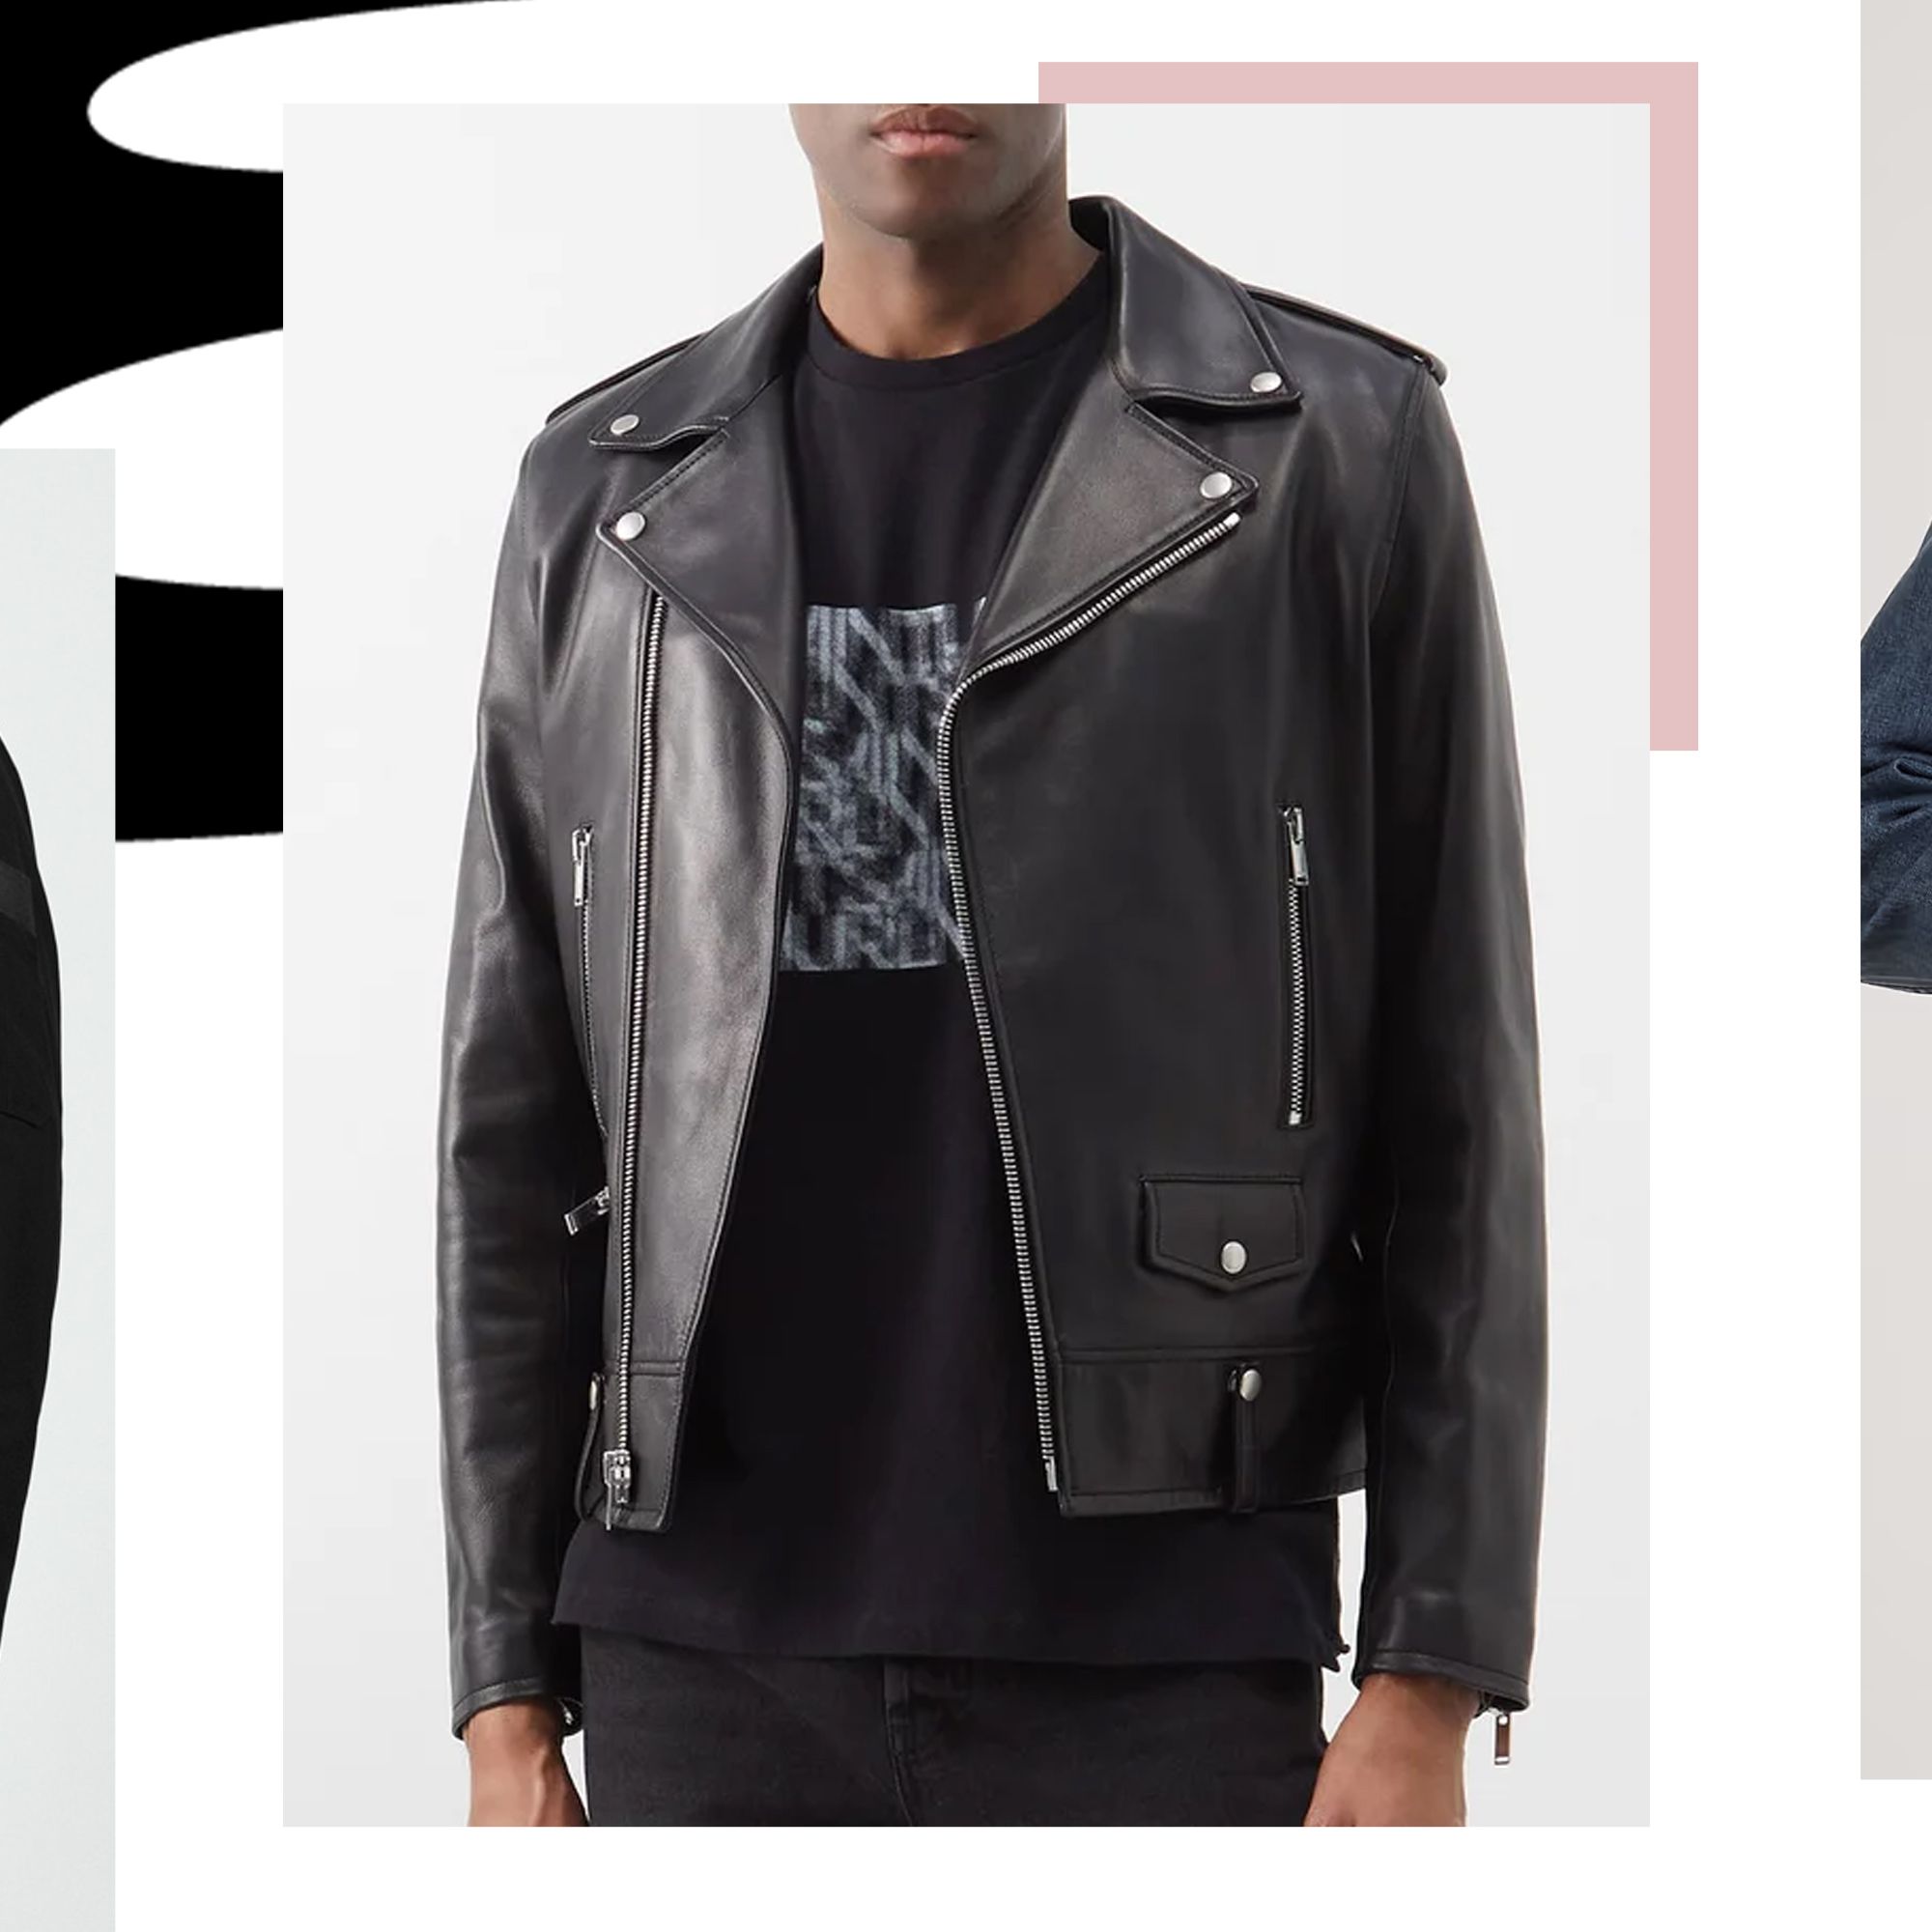 Every Man Needs These Coats and Jackets in His Wardrobe